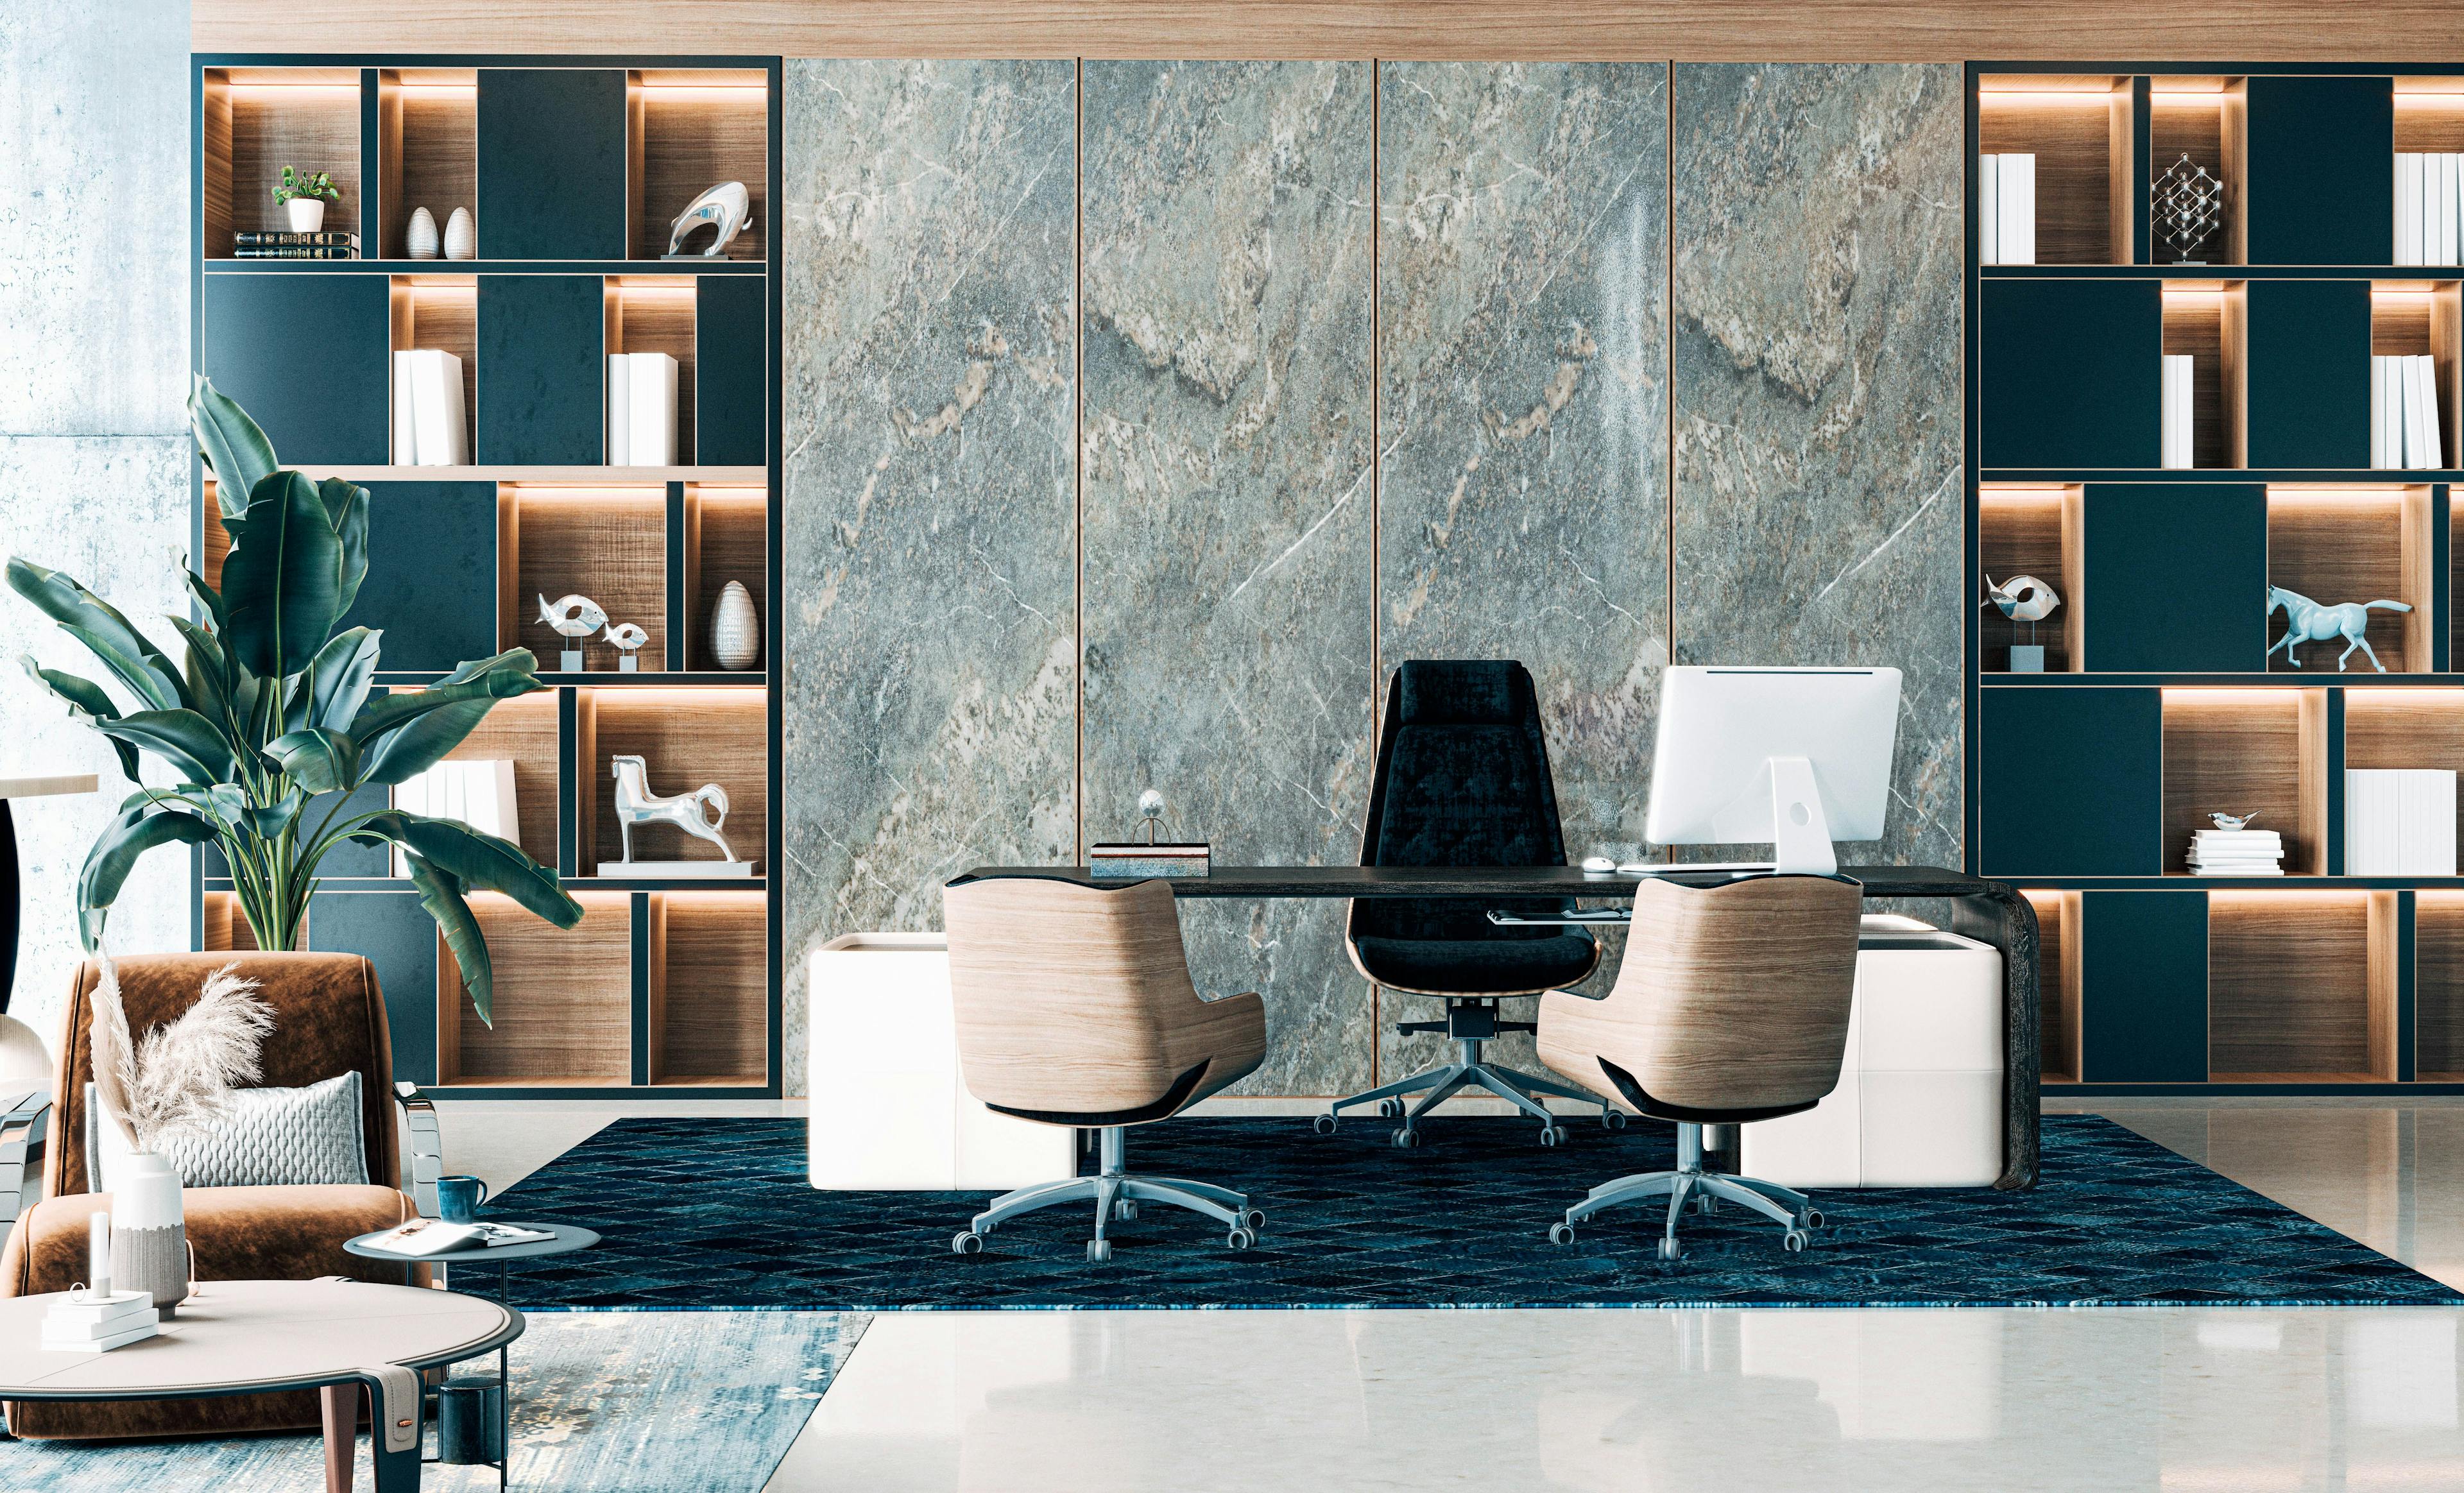 3d-interior-office-room-with-desk-armchairs